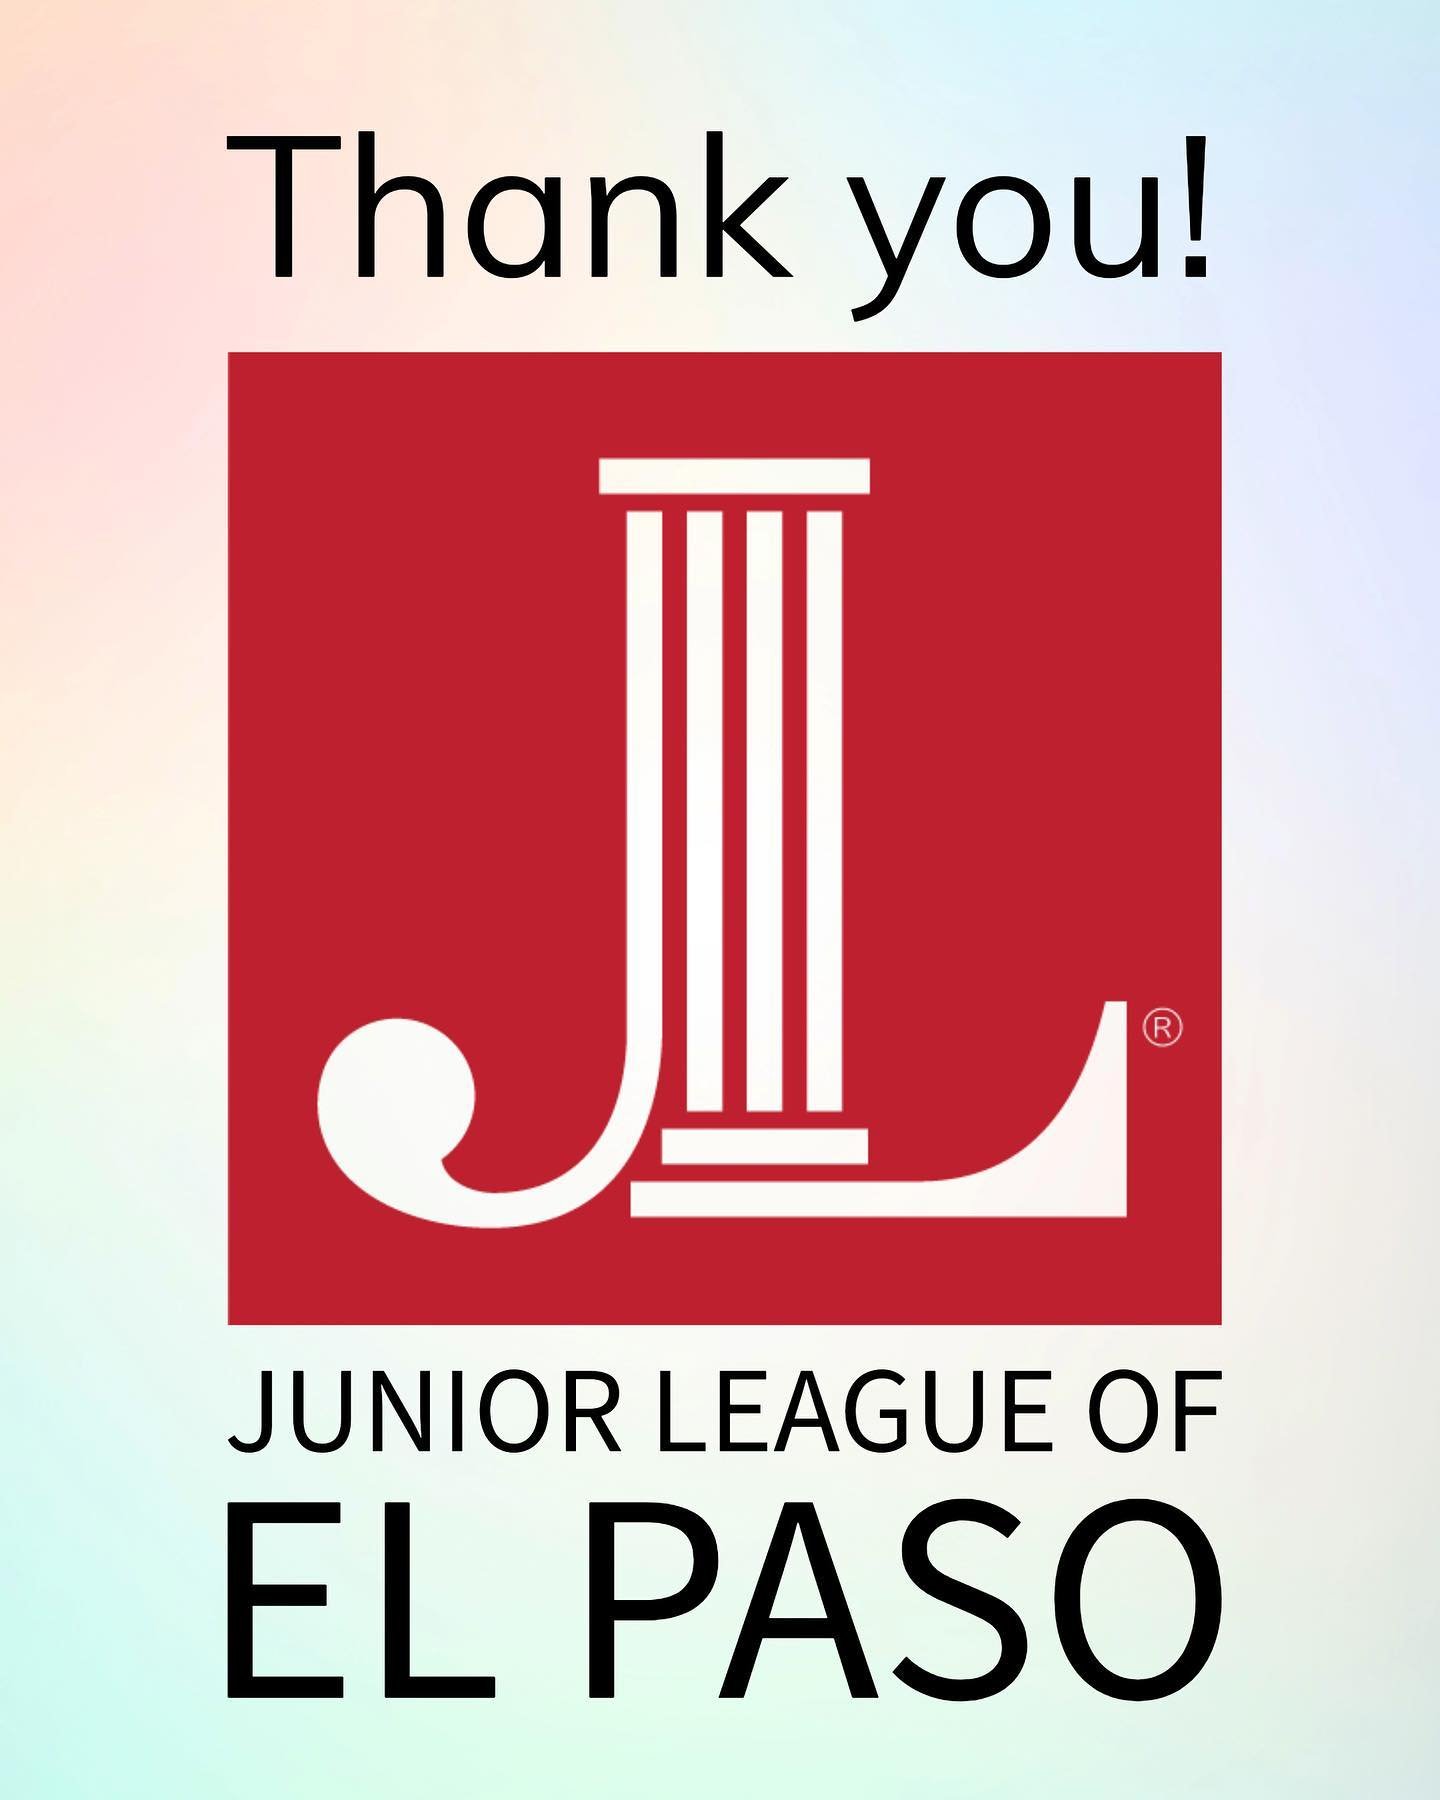 Sun City Musical Arts would like to extend our sincerest gratitude to the Junior League of El Paso for their generous donation through their Community Assistance Fund! This fund will allow us to purchase instruments for our students. Thank you again 